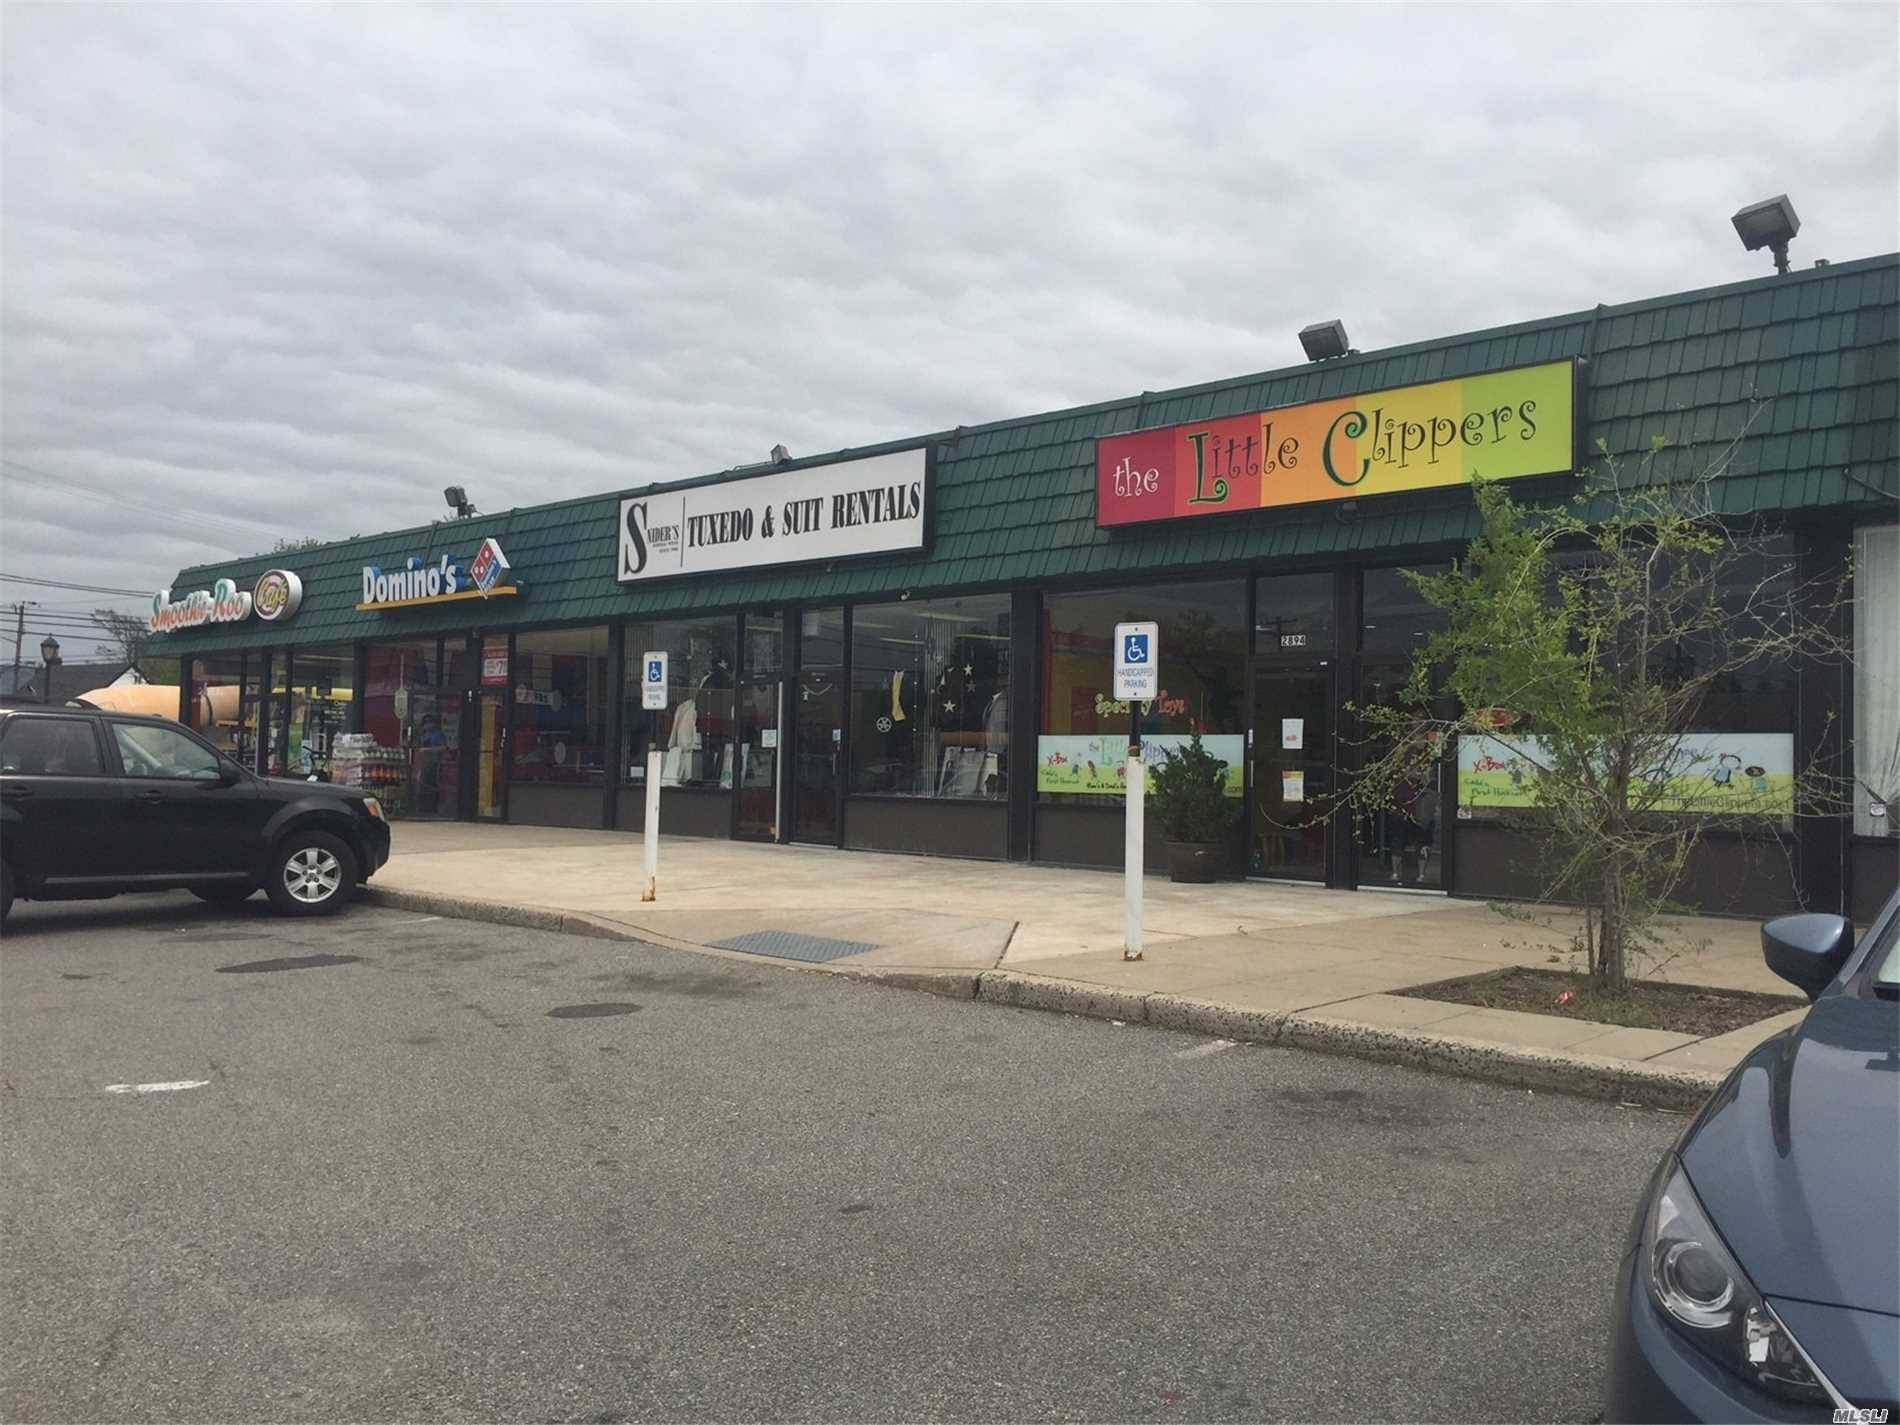 Look No More ! ! ! Prime Location In A High Traffic Shopping Center 1540 Sqft 10 Ft Ceiling Storefront Great For Any Business Some Present Tenants Include Domino's Pizza ...